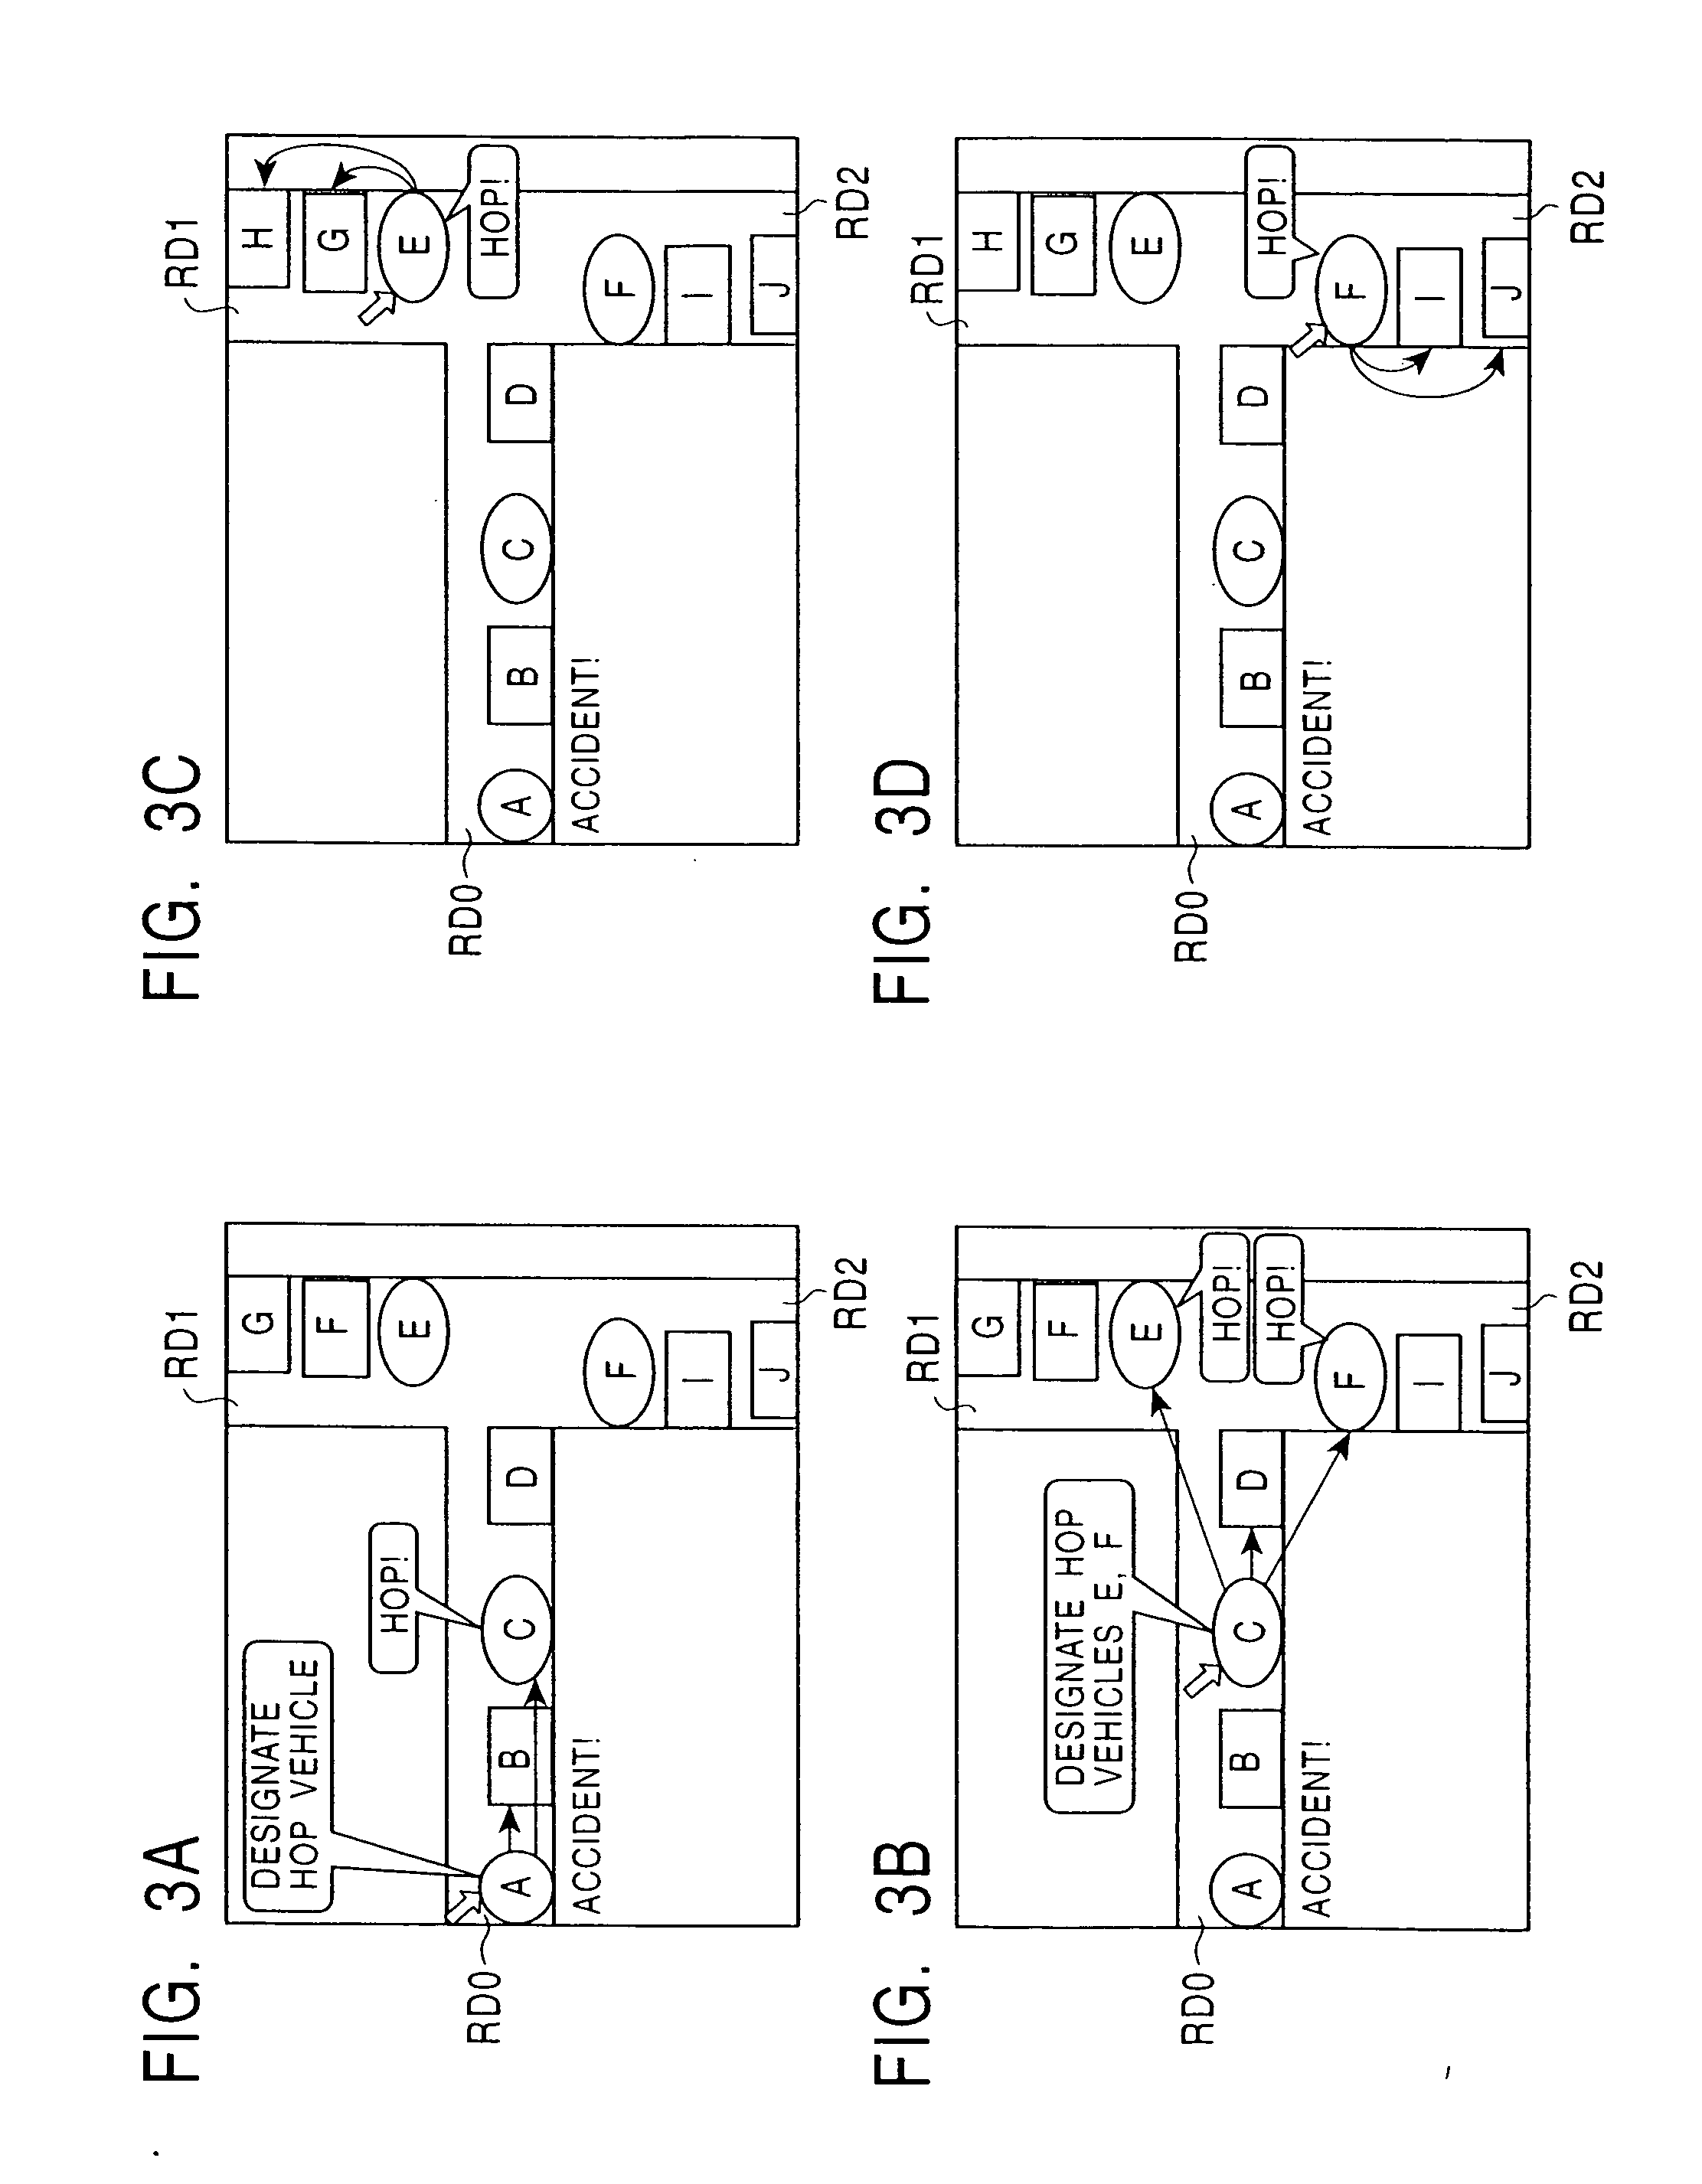 Inter-vehicle communication method and device